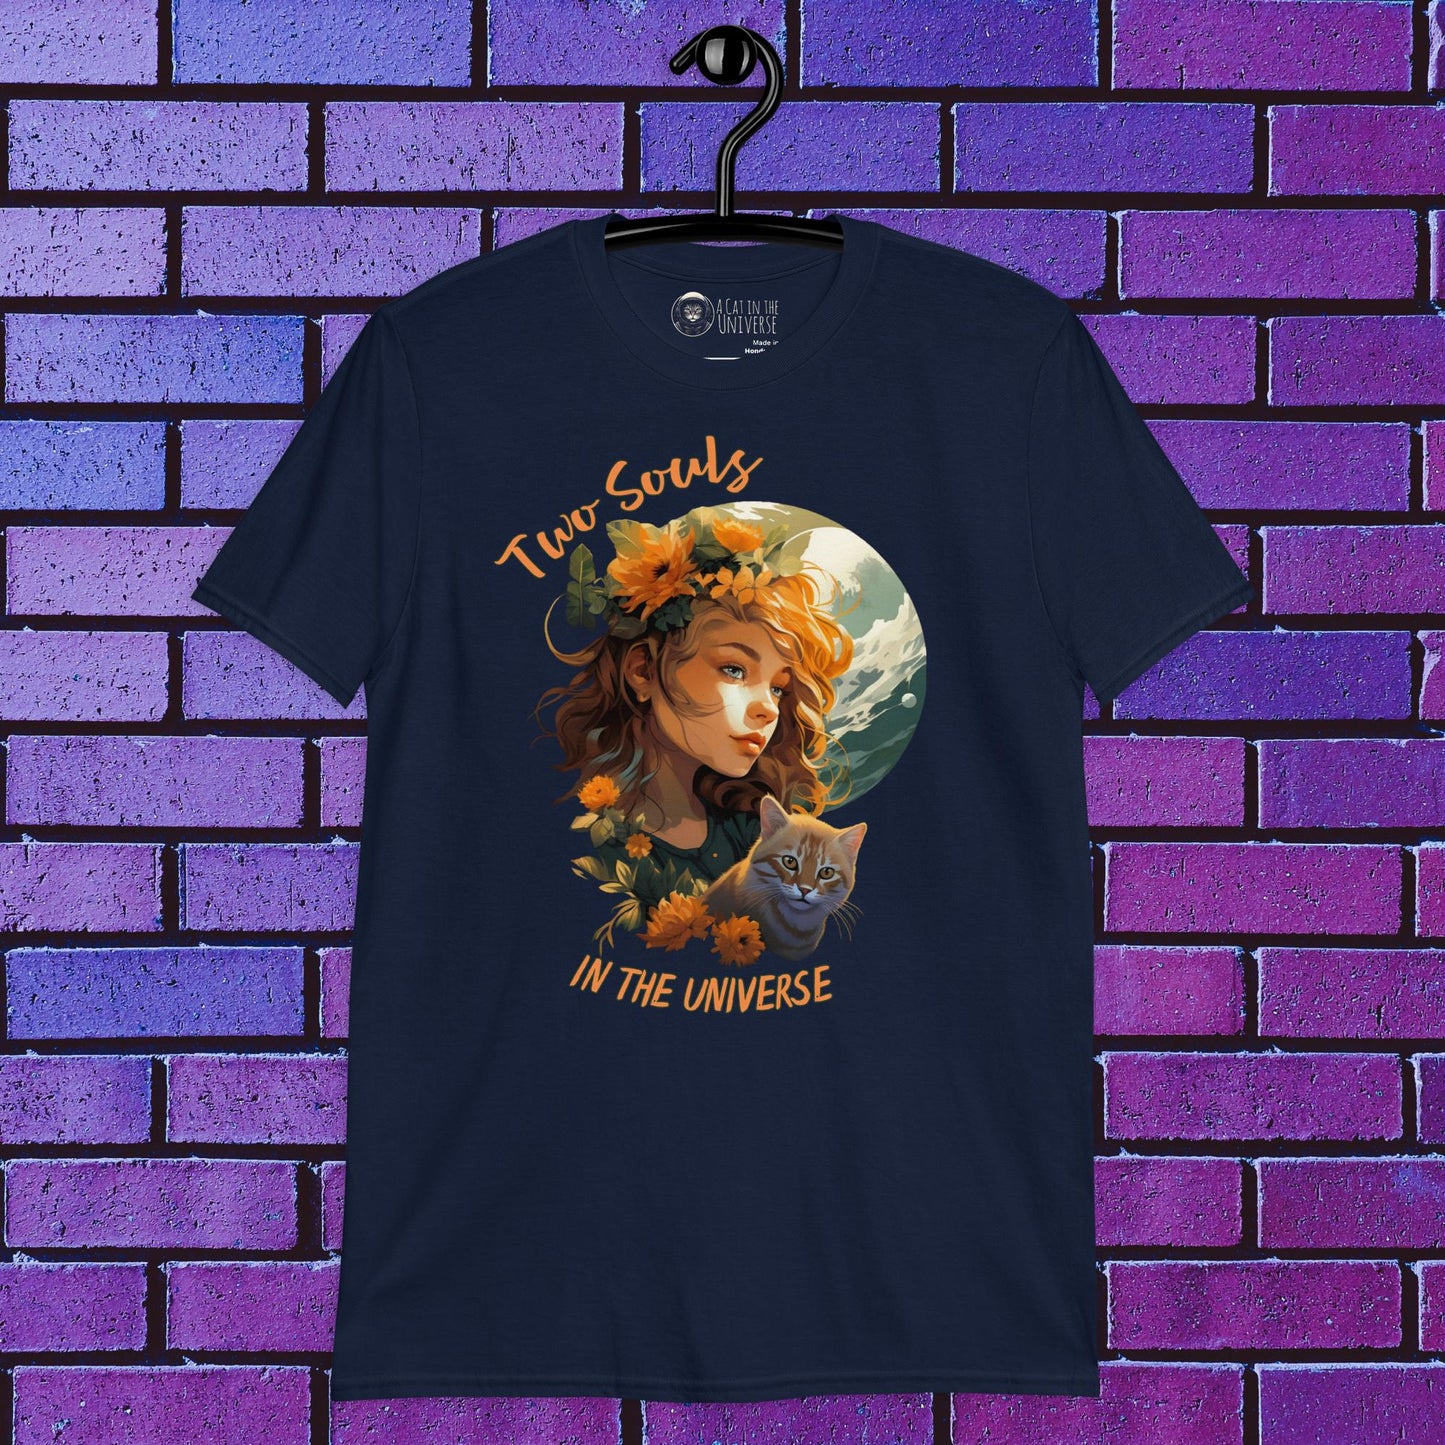 Camiseta "Two Souls in the Universe"